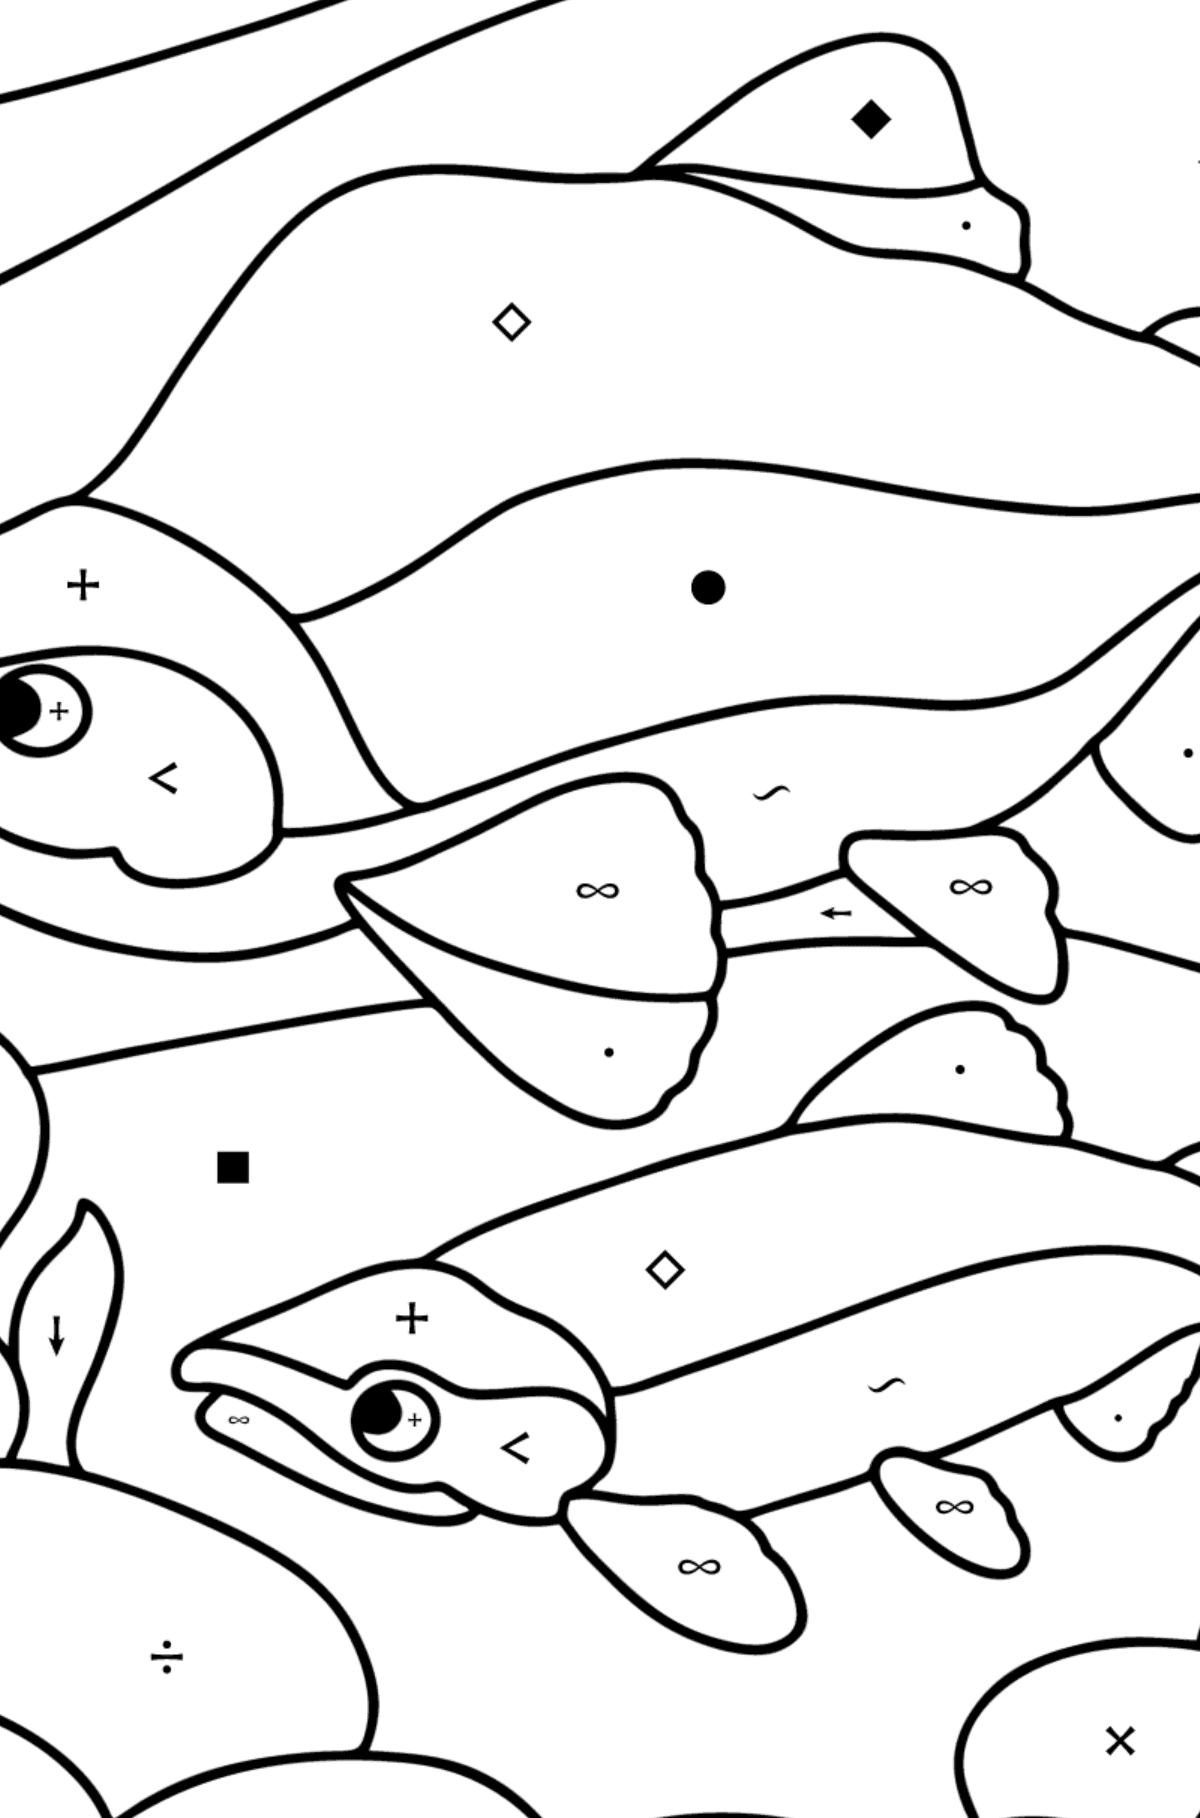 Red salmon coloring page - Coloring by Symbols for Kids